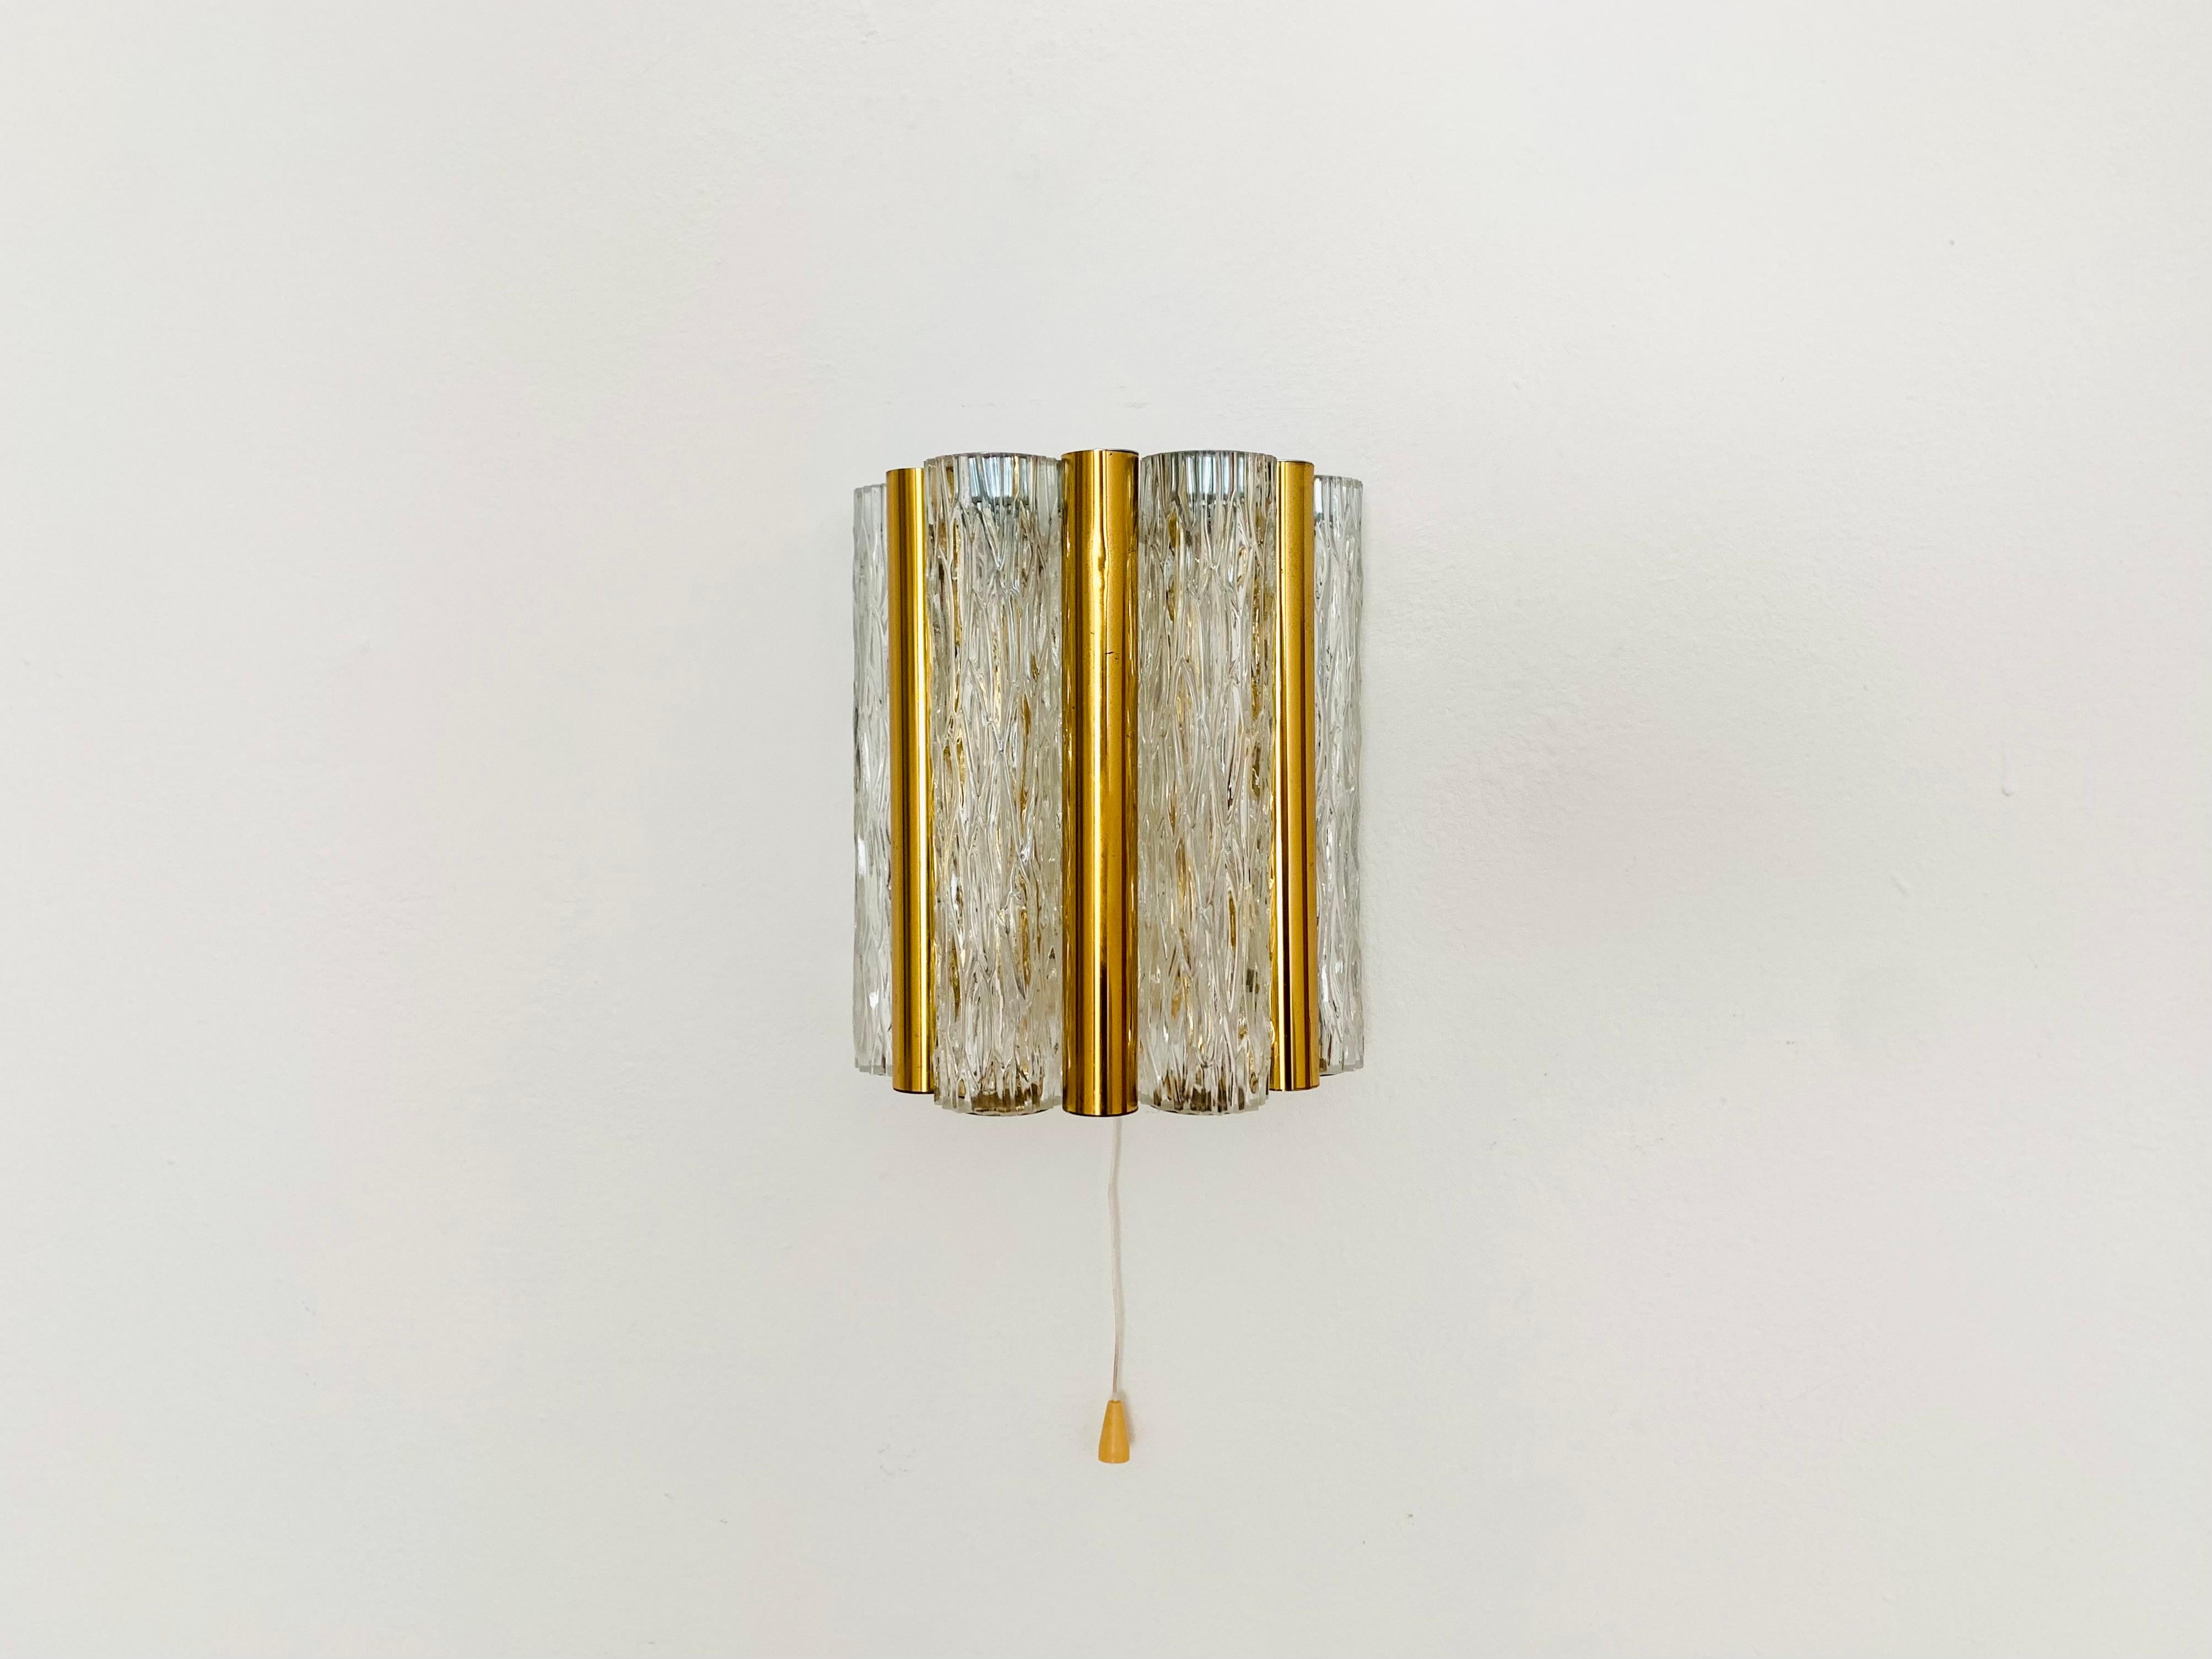 Very beautiful and elegant ice glass wall lamp from the 1960s.
The lamp is of high quality.
The structured glass creates a wonderful sparkling and noble light.

Manufacturer: Kaiser Lights/ Kaiser Idell

The lamp has an integrated switch but can